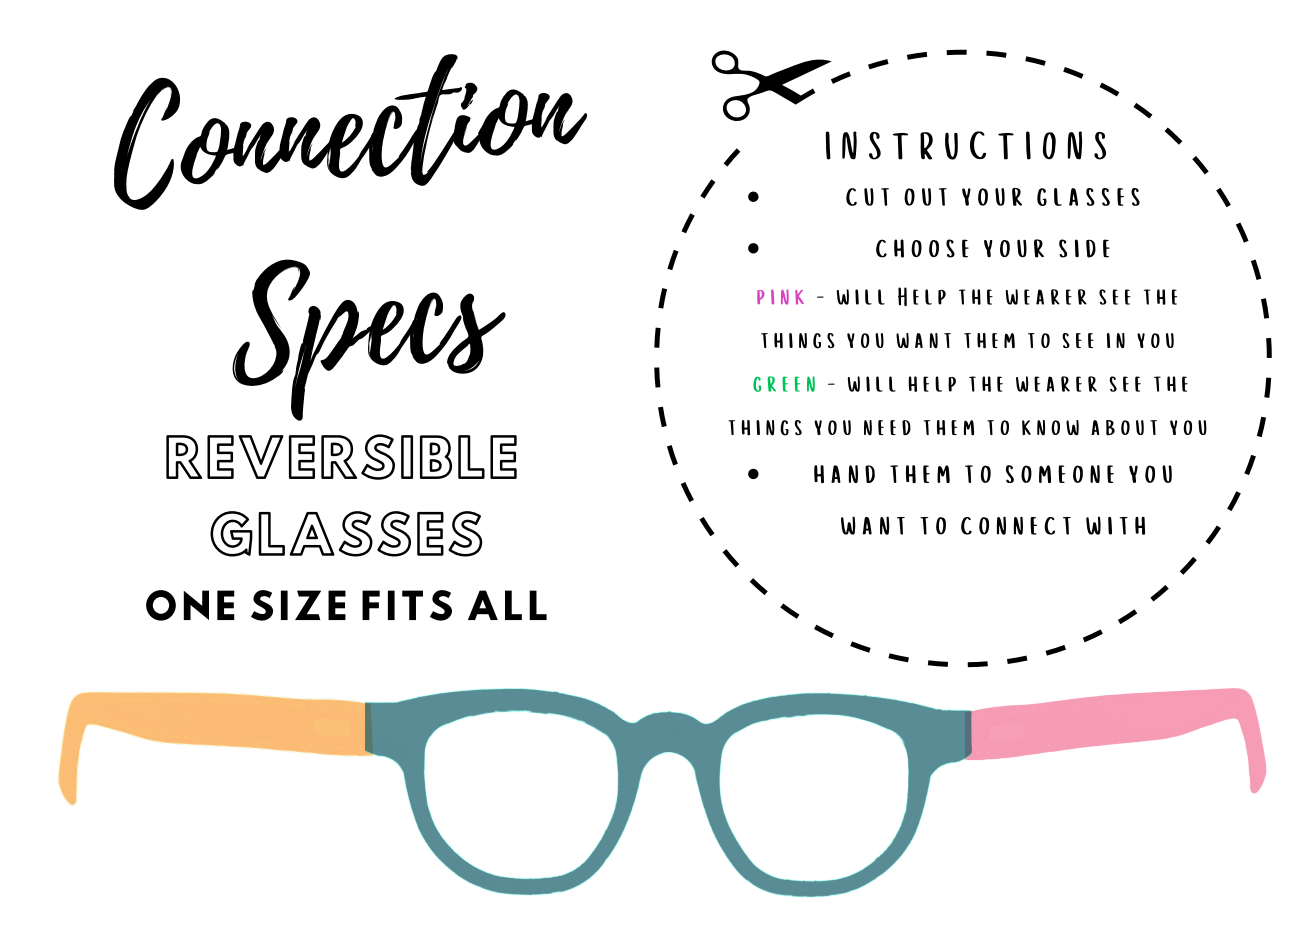 Digital artwork showing a multicolour pair of glasses with the arms/temples stretched out to the sides. Text reads: Connection Specs reversible glasses, one size fits all. Instructions: cut out your glasses, choose your side, pink will help the wearer see the things you want them to see in you, green will help the wearer to see the things you need them to know about you, hand them to someone you want to connect with.